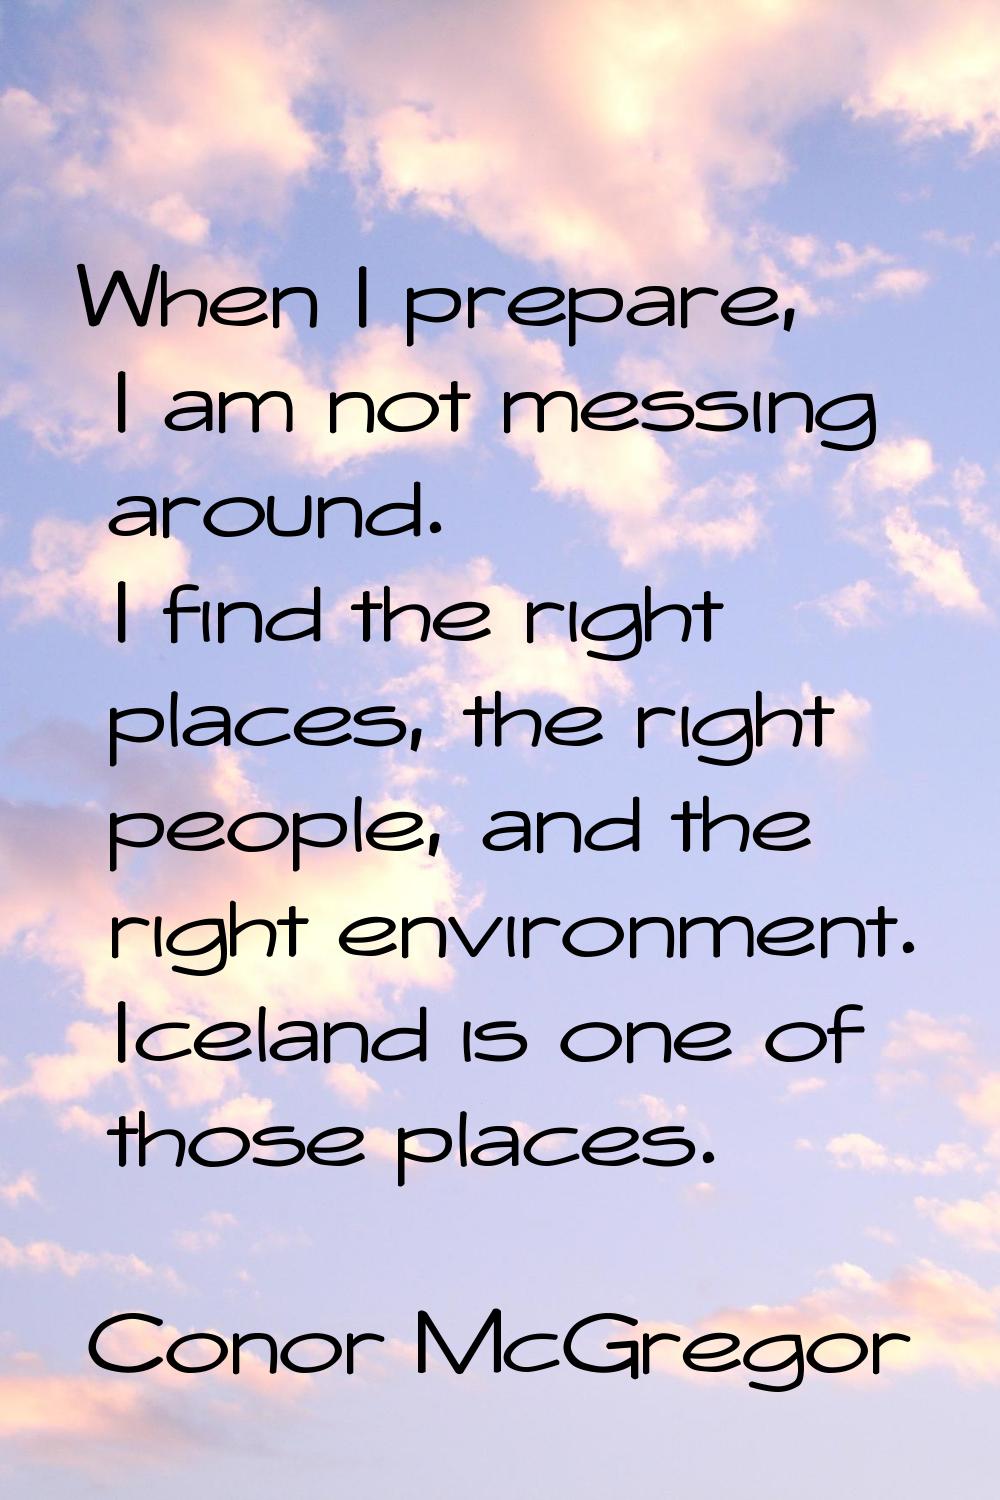 When I prepare, I am not messing around. I find the right places, the right people, and the right e